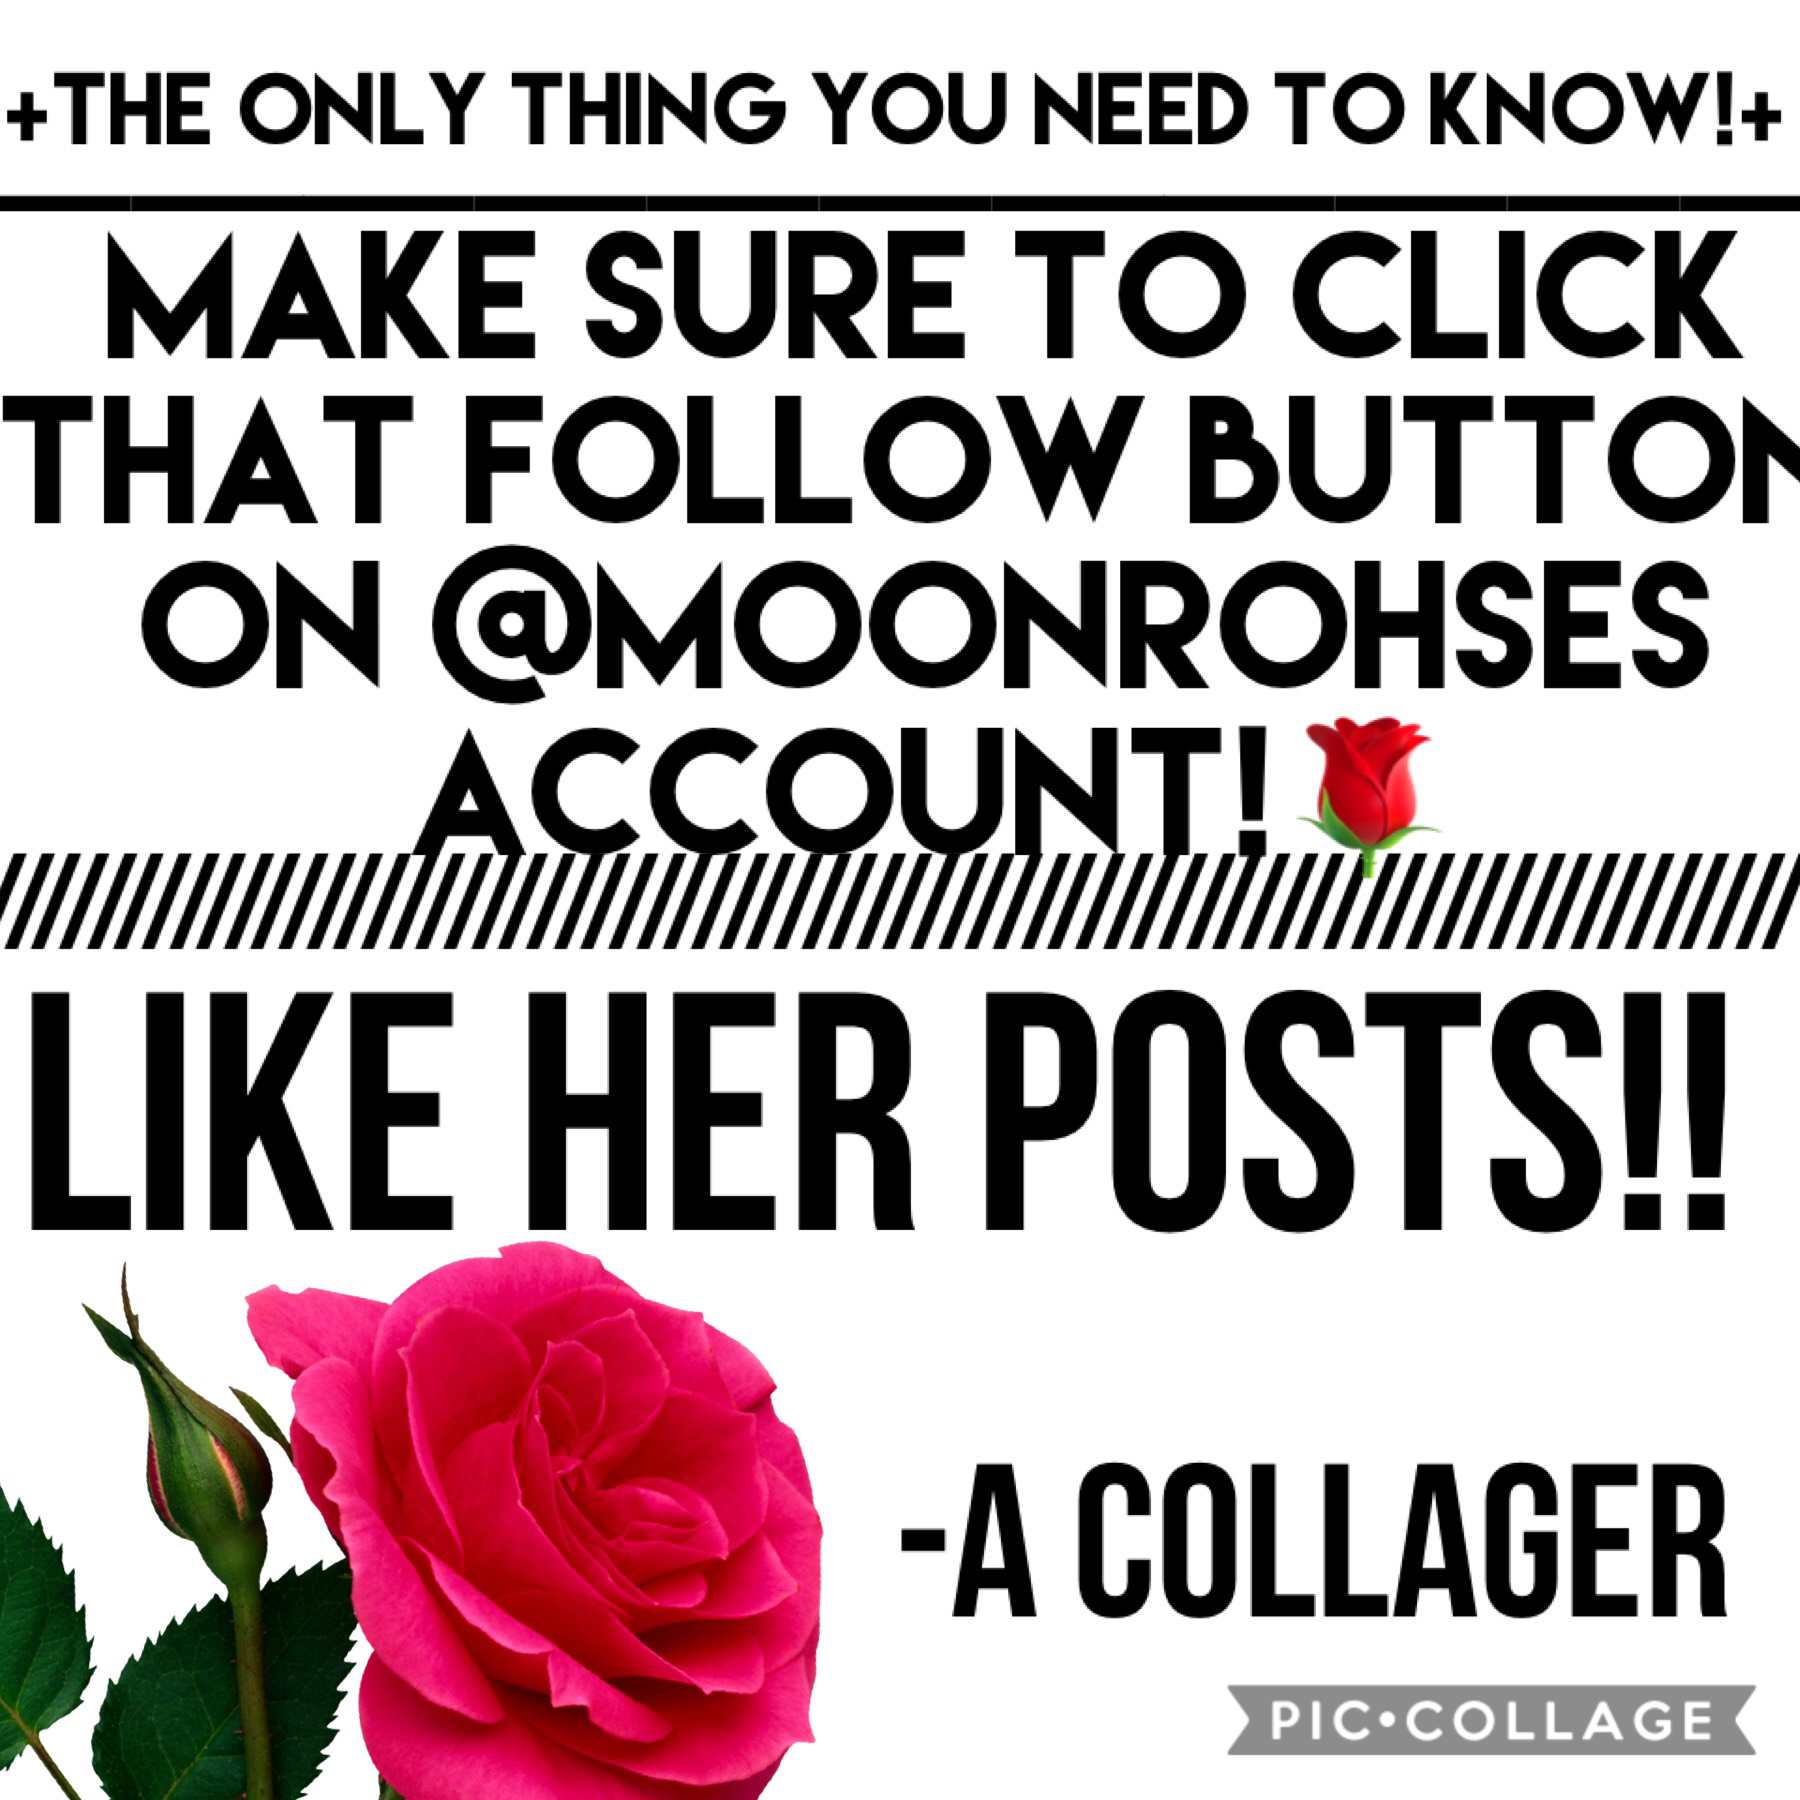 Let’s get to business shall we?😂 (tap)

FOLLOW @moonrohses🌹

LIKE HER POSTS, BECAUSE THEY’RE AMAZING!!😊

🌹🌹🌹🌹🌹🌹🌹🌹🌹🌹🌹🌹🌹🌹

✌️✌️✌️✌️✌️✌️✌️☝️✌️✌️☝️☝️☝️☝️
